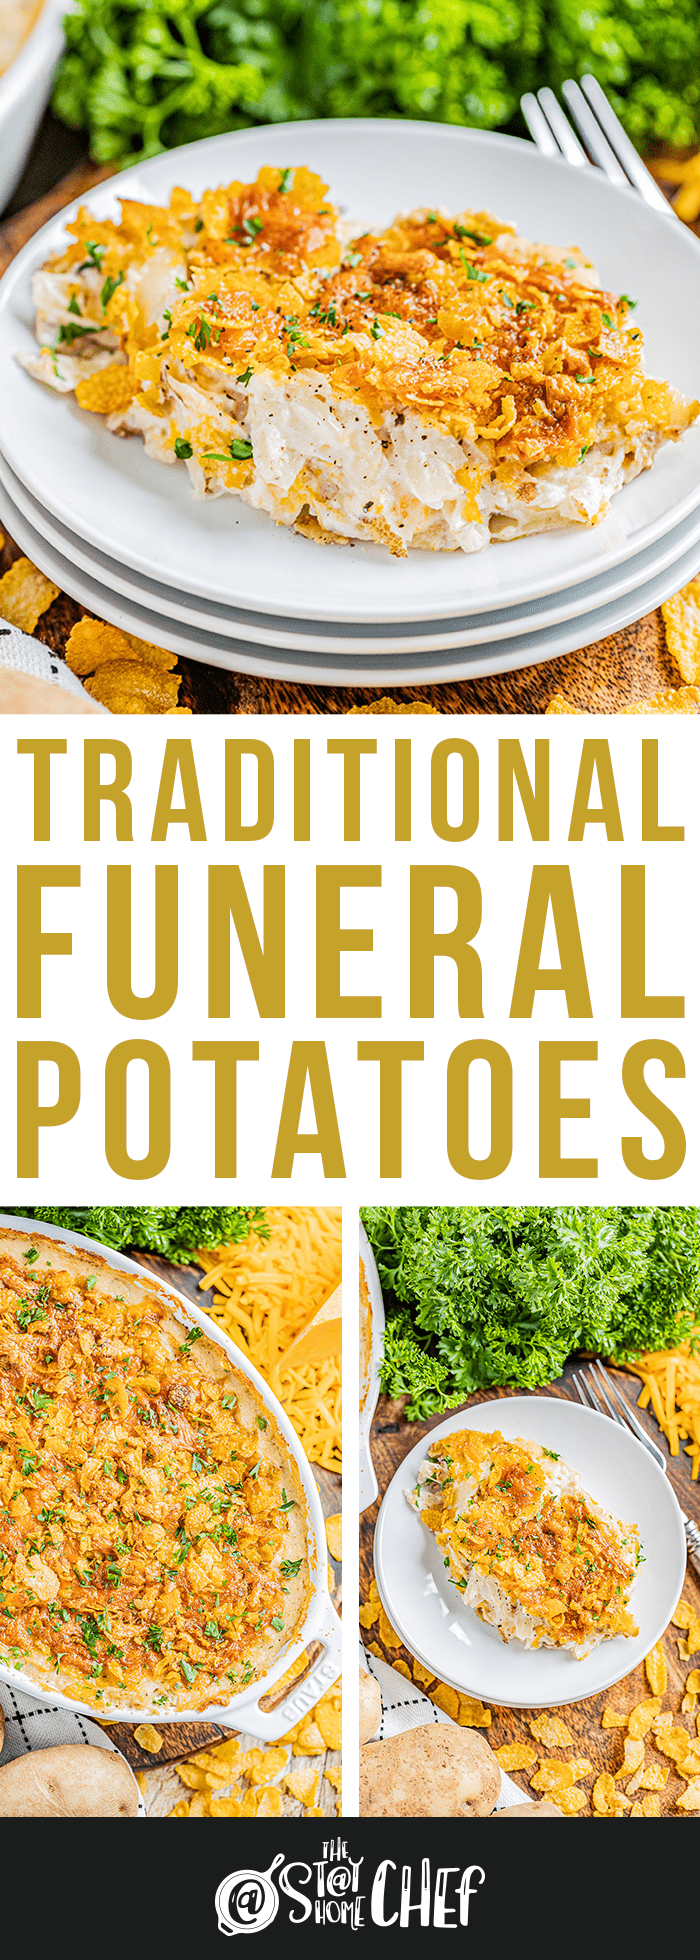 Traditional Funeral Potatoes